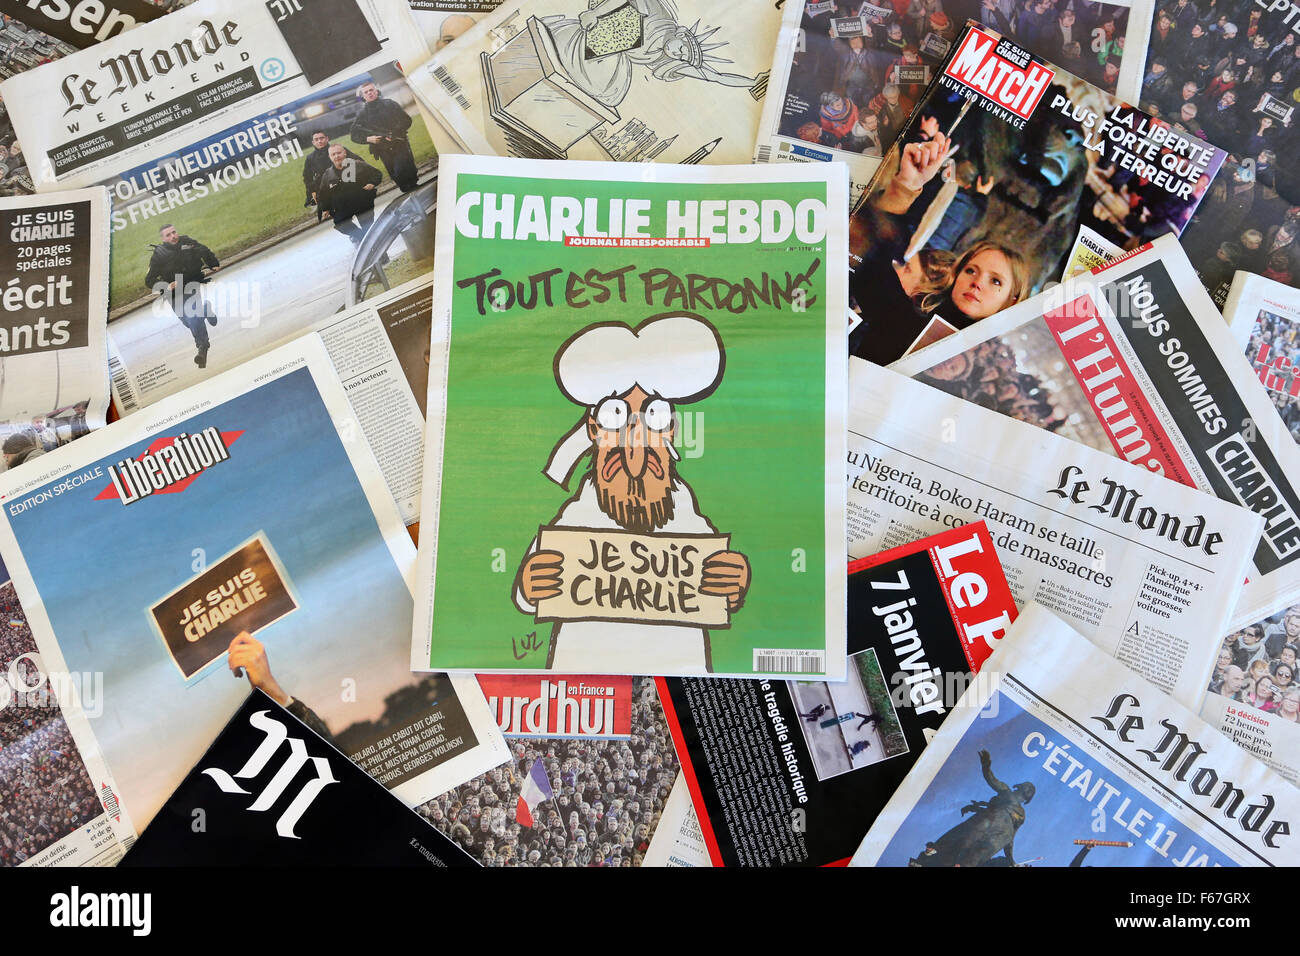 France, on 2015/01/14: front page of daily or weekly newspapers, from which the Charlie Hebdo satirical magazine Stock Photo